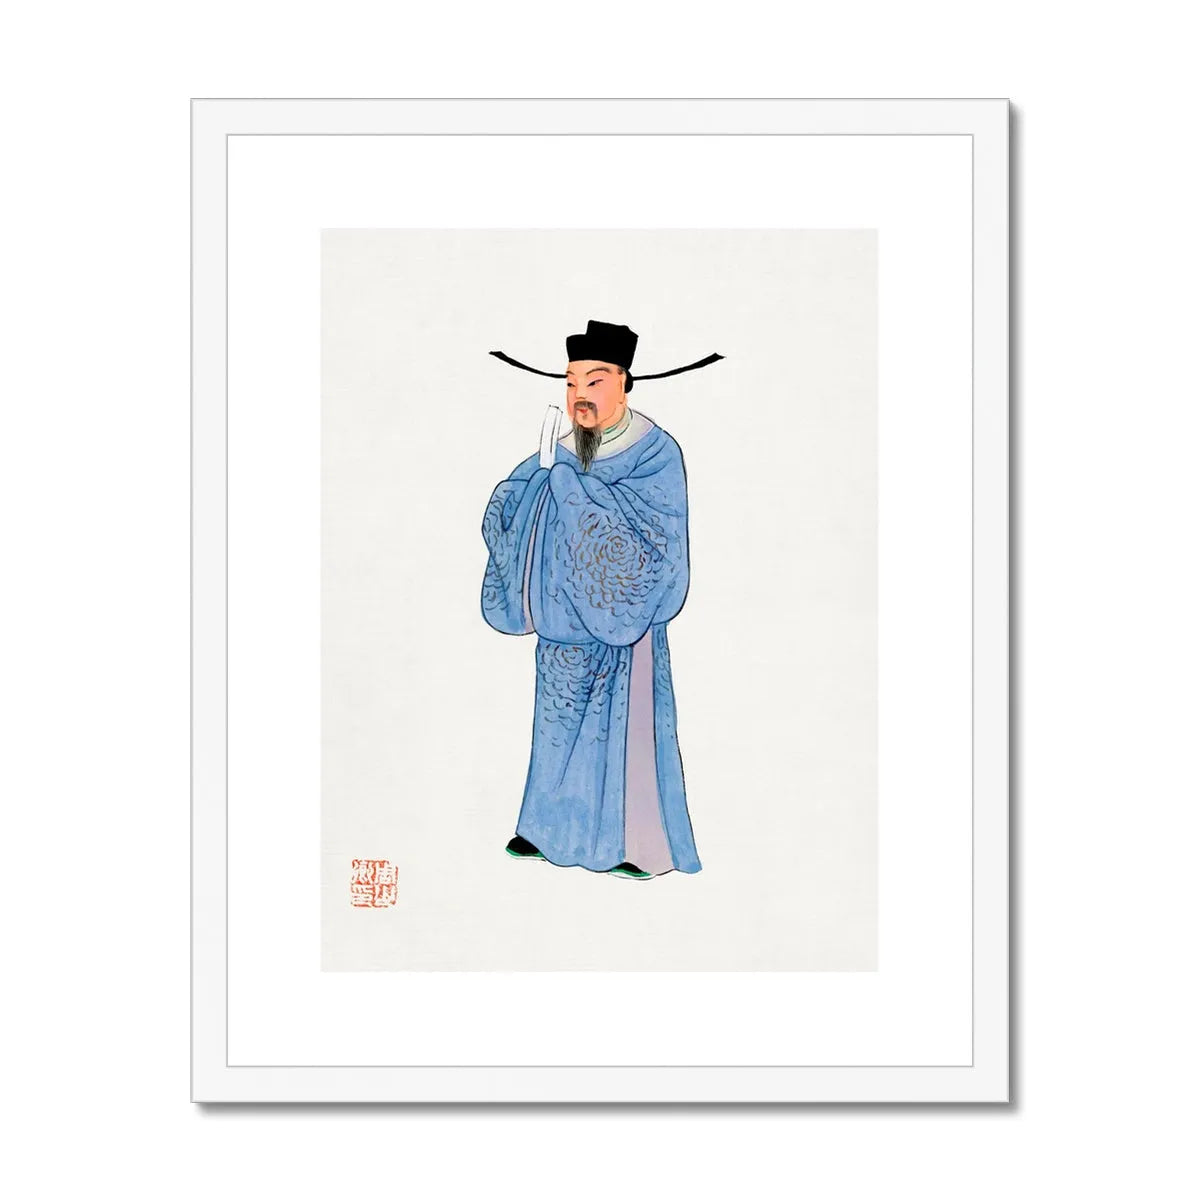 Chinese Official Framed & Mounted Print - 16’x20’ / White Frame - Posters Prints & Visual Artwork - Aesthetic Art